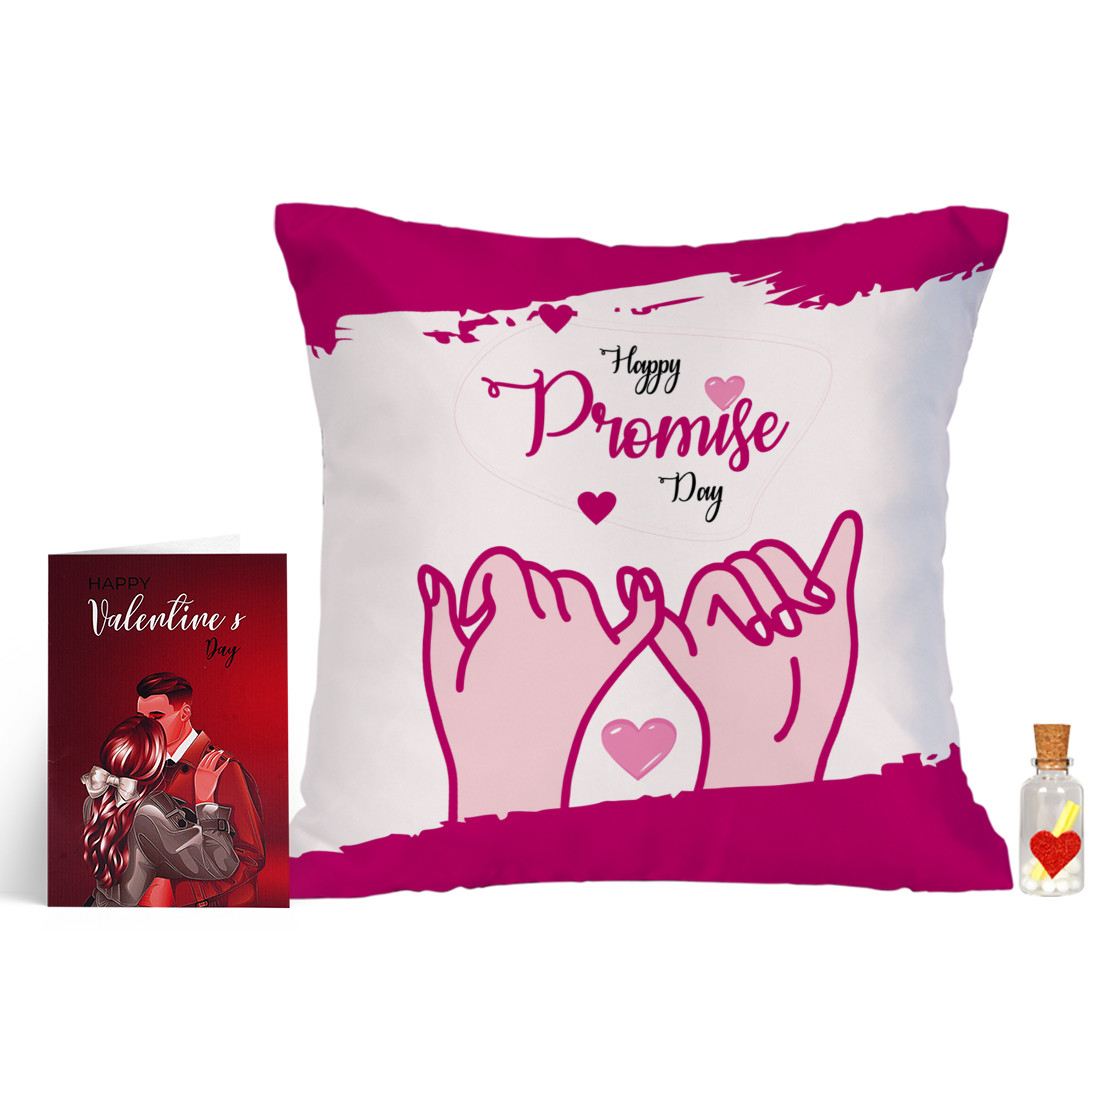 ME & YOU Romantic Gift For Lover/Wife/Girlfriend|Promise Day Gift|Gifts For